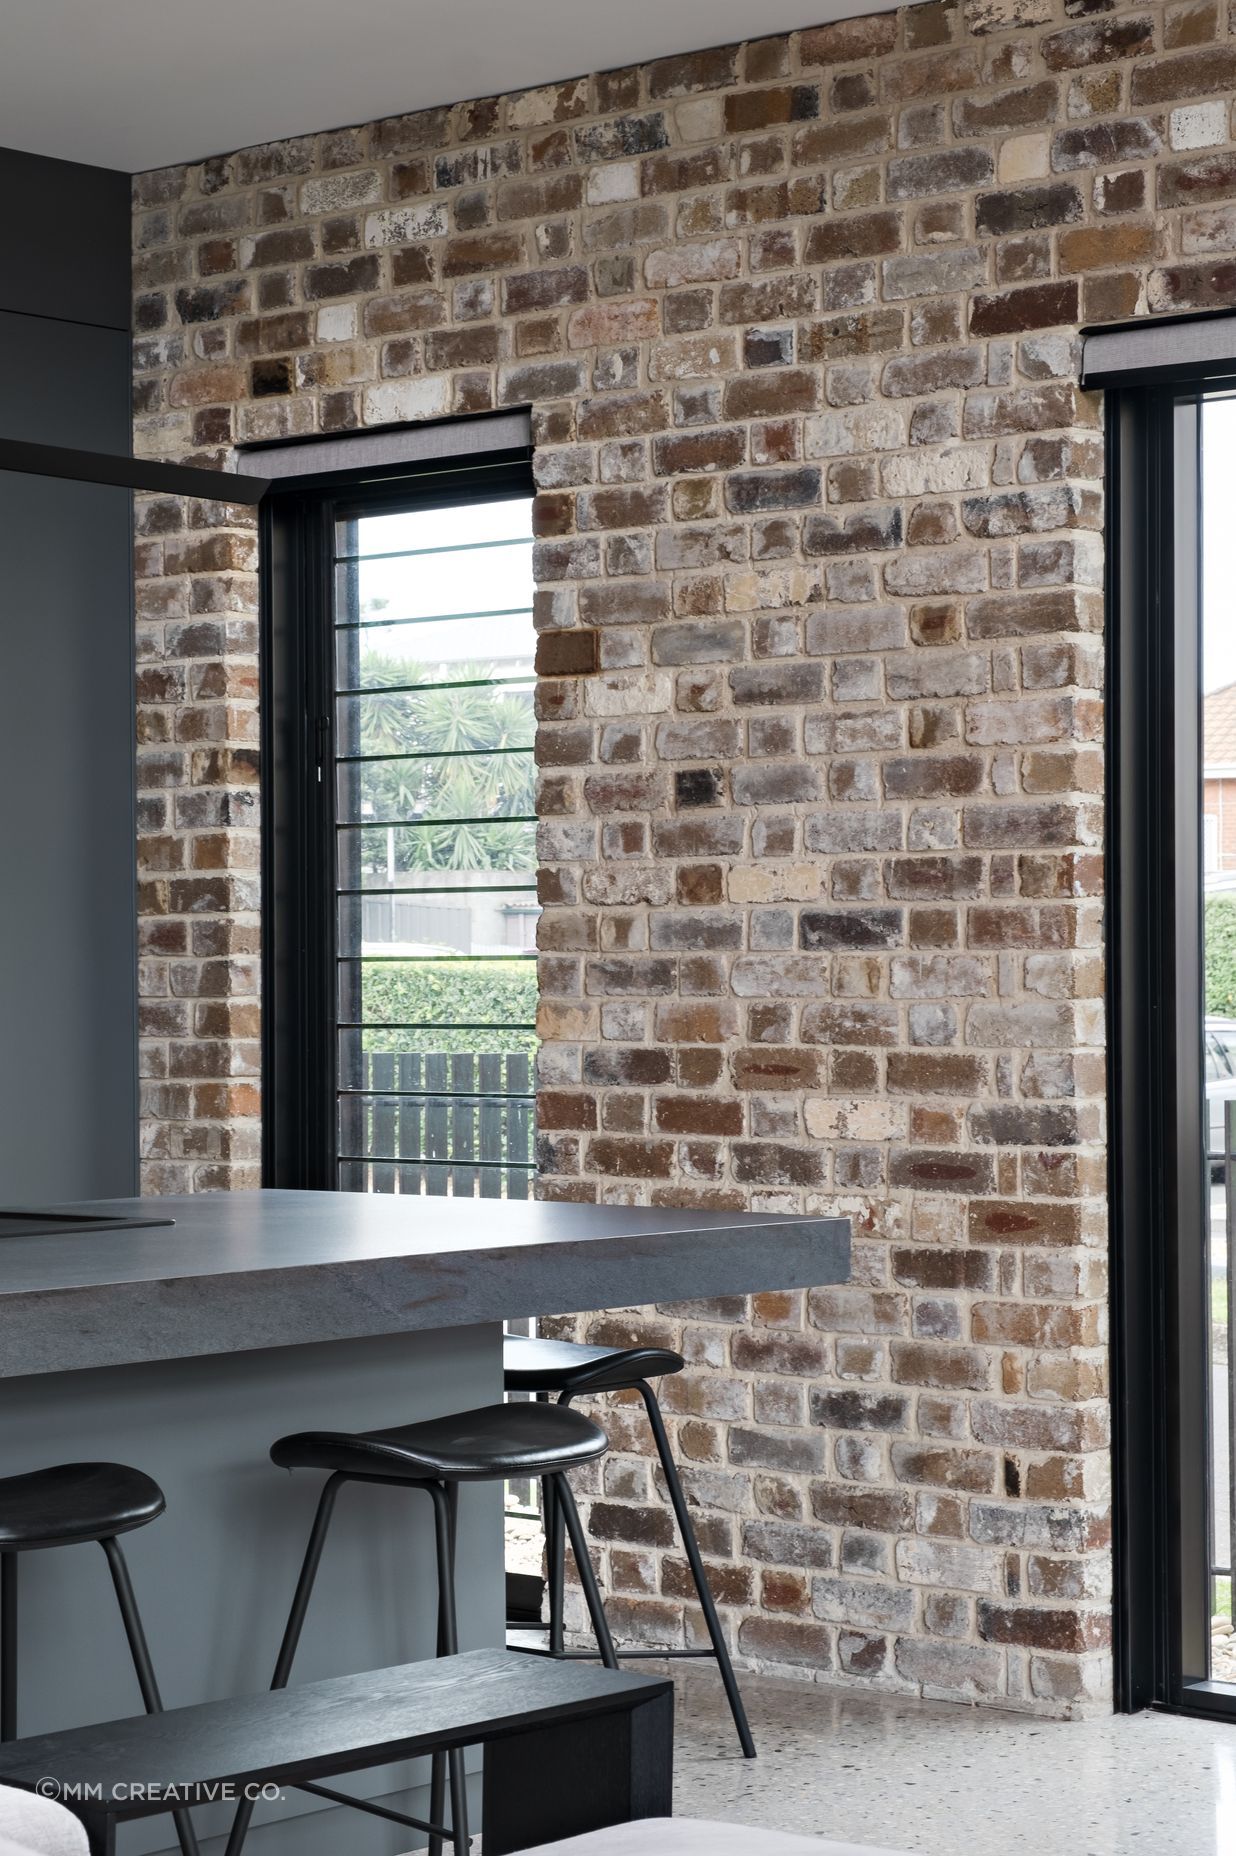 The recycled brick facade is carried through one wall of the interior.